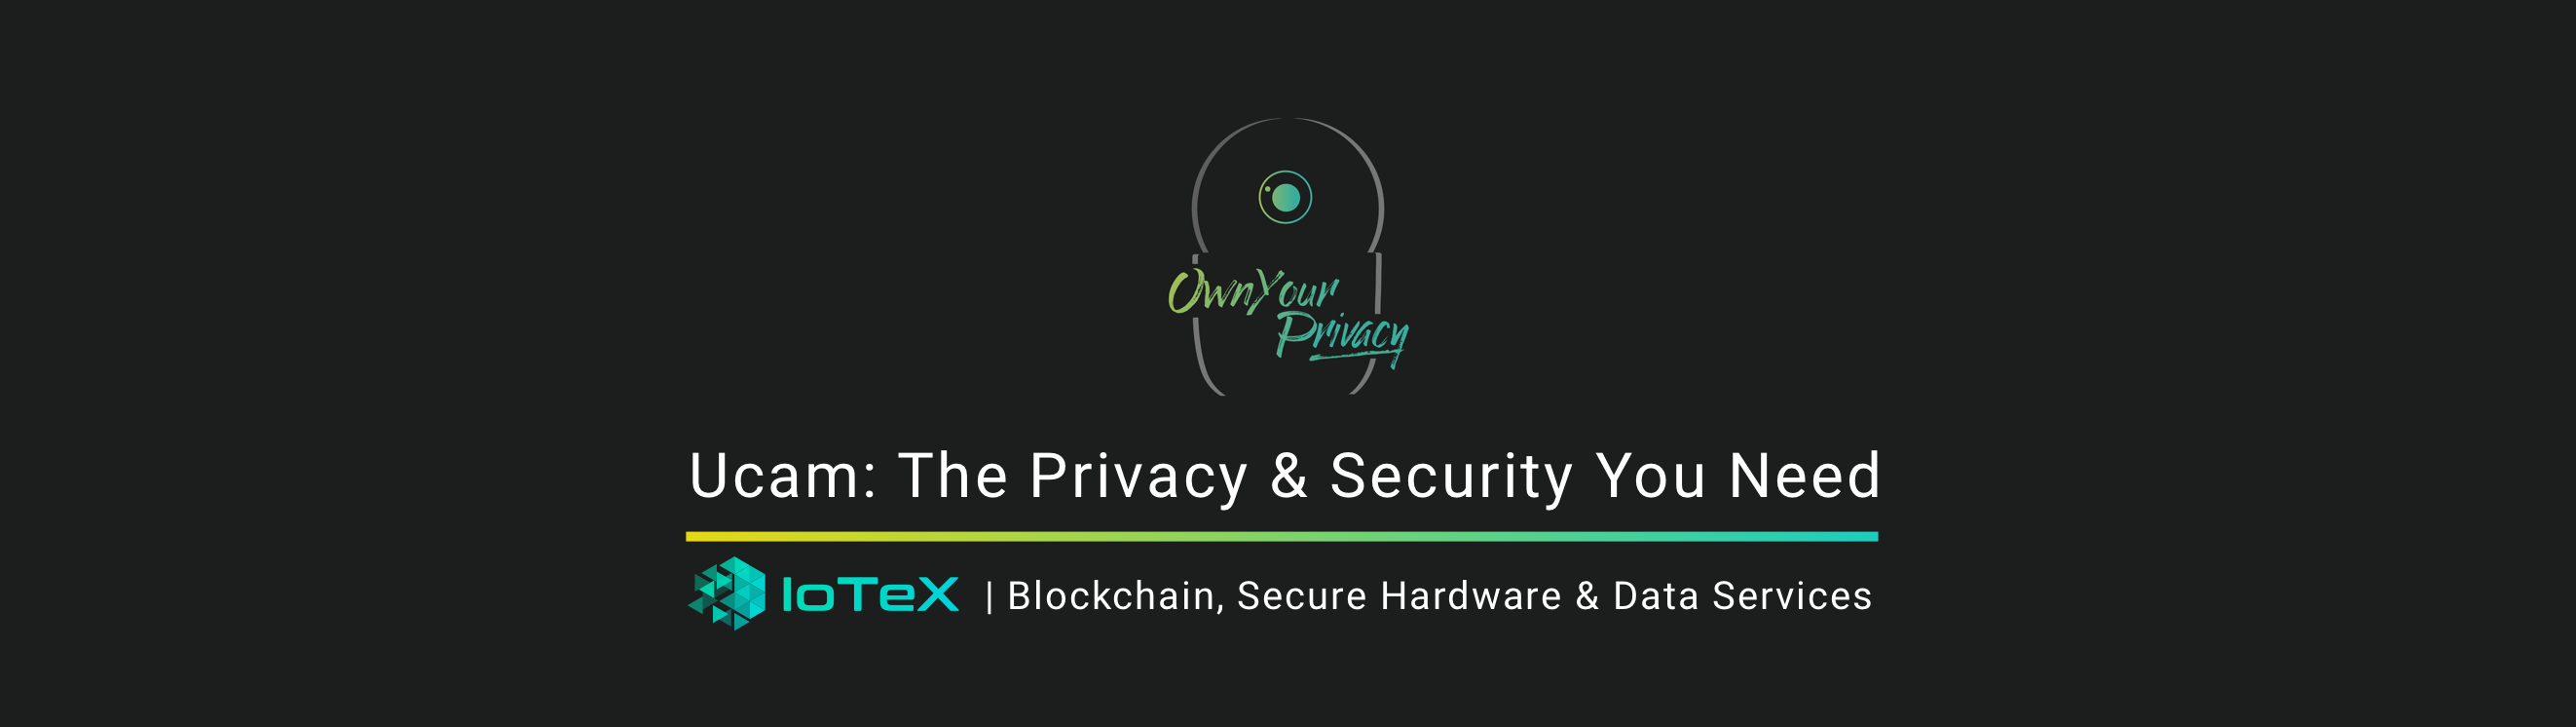 Ucam by IoTeX: The Privacy & Security You Need